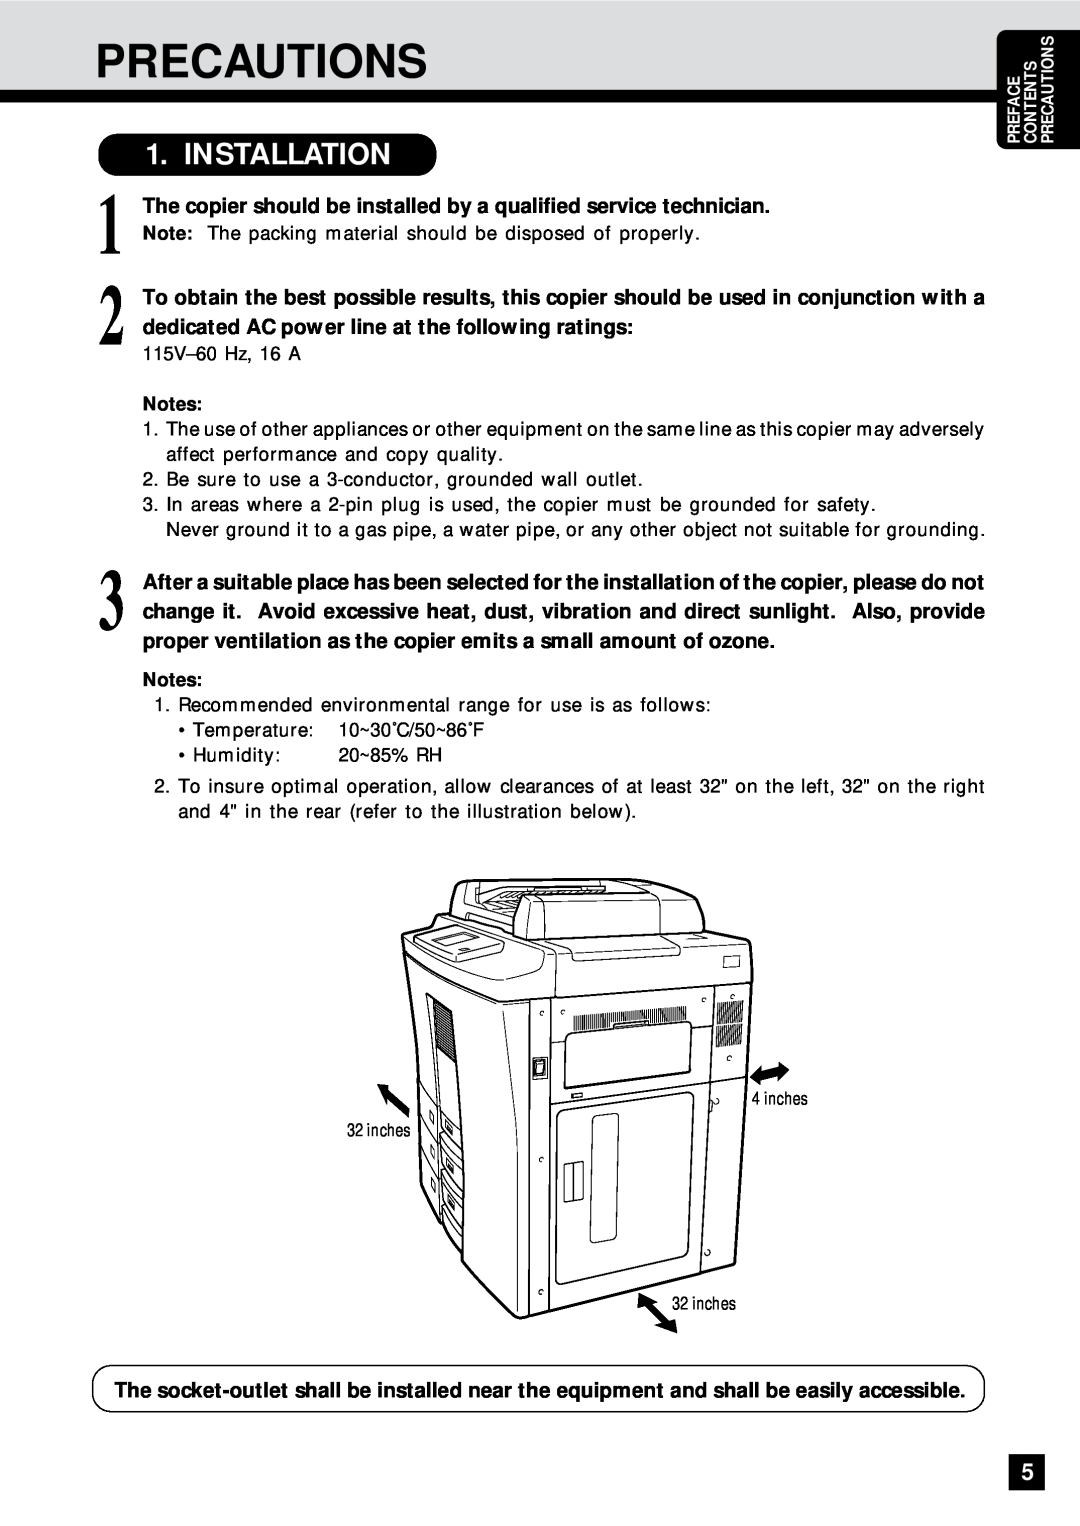 Sharp AR-650 operation manual Precautions, Installation, The copier should be installed by a qualified service technician 